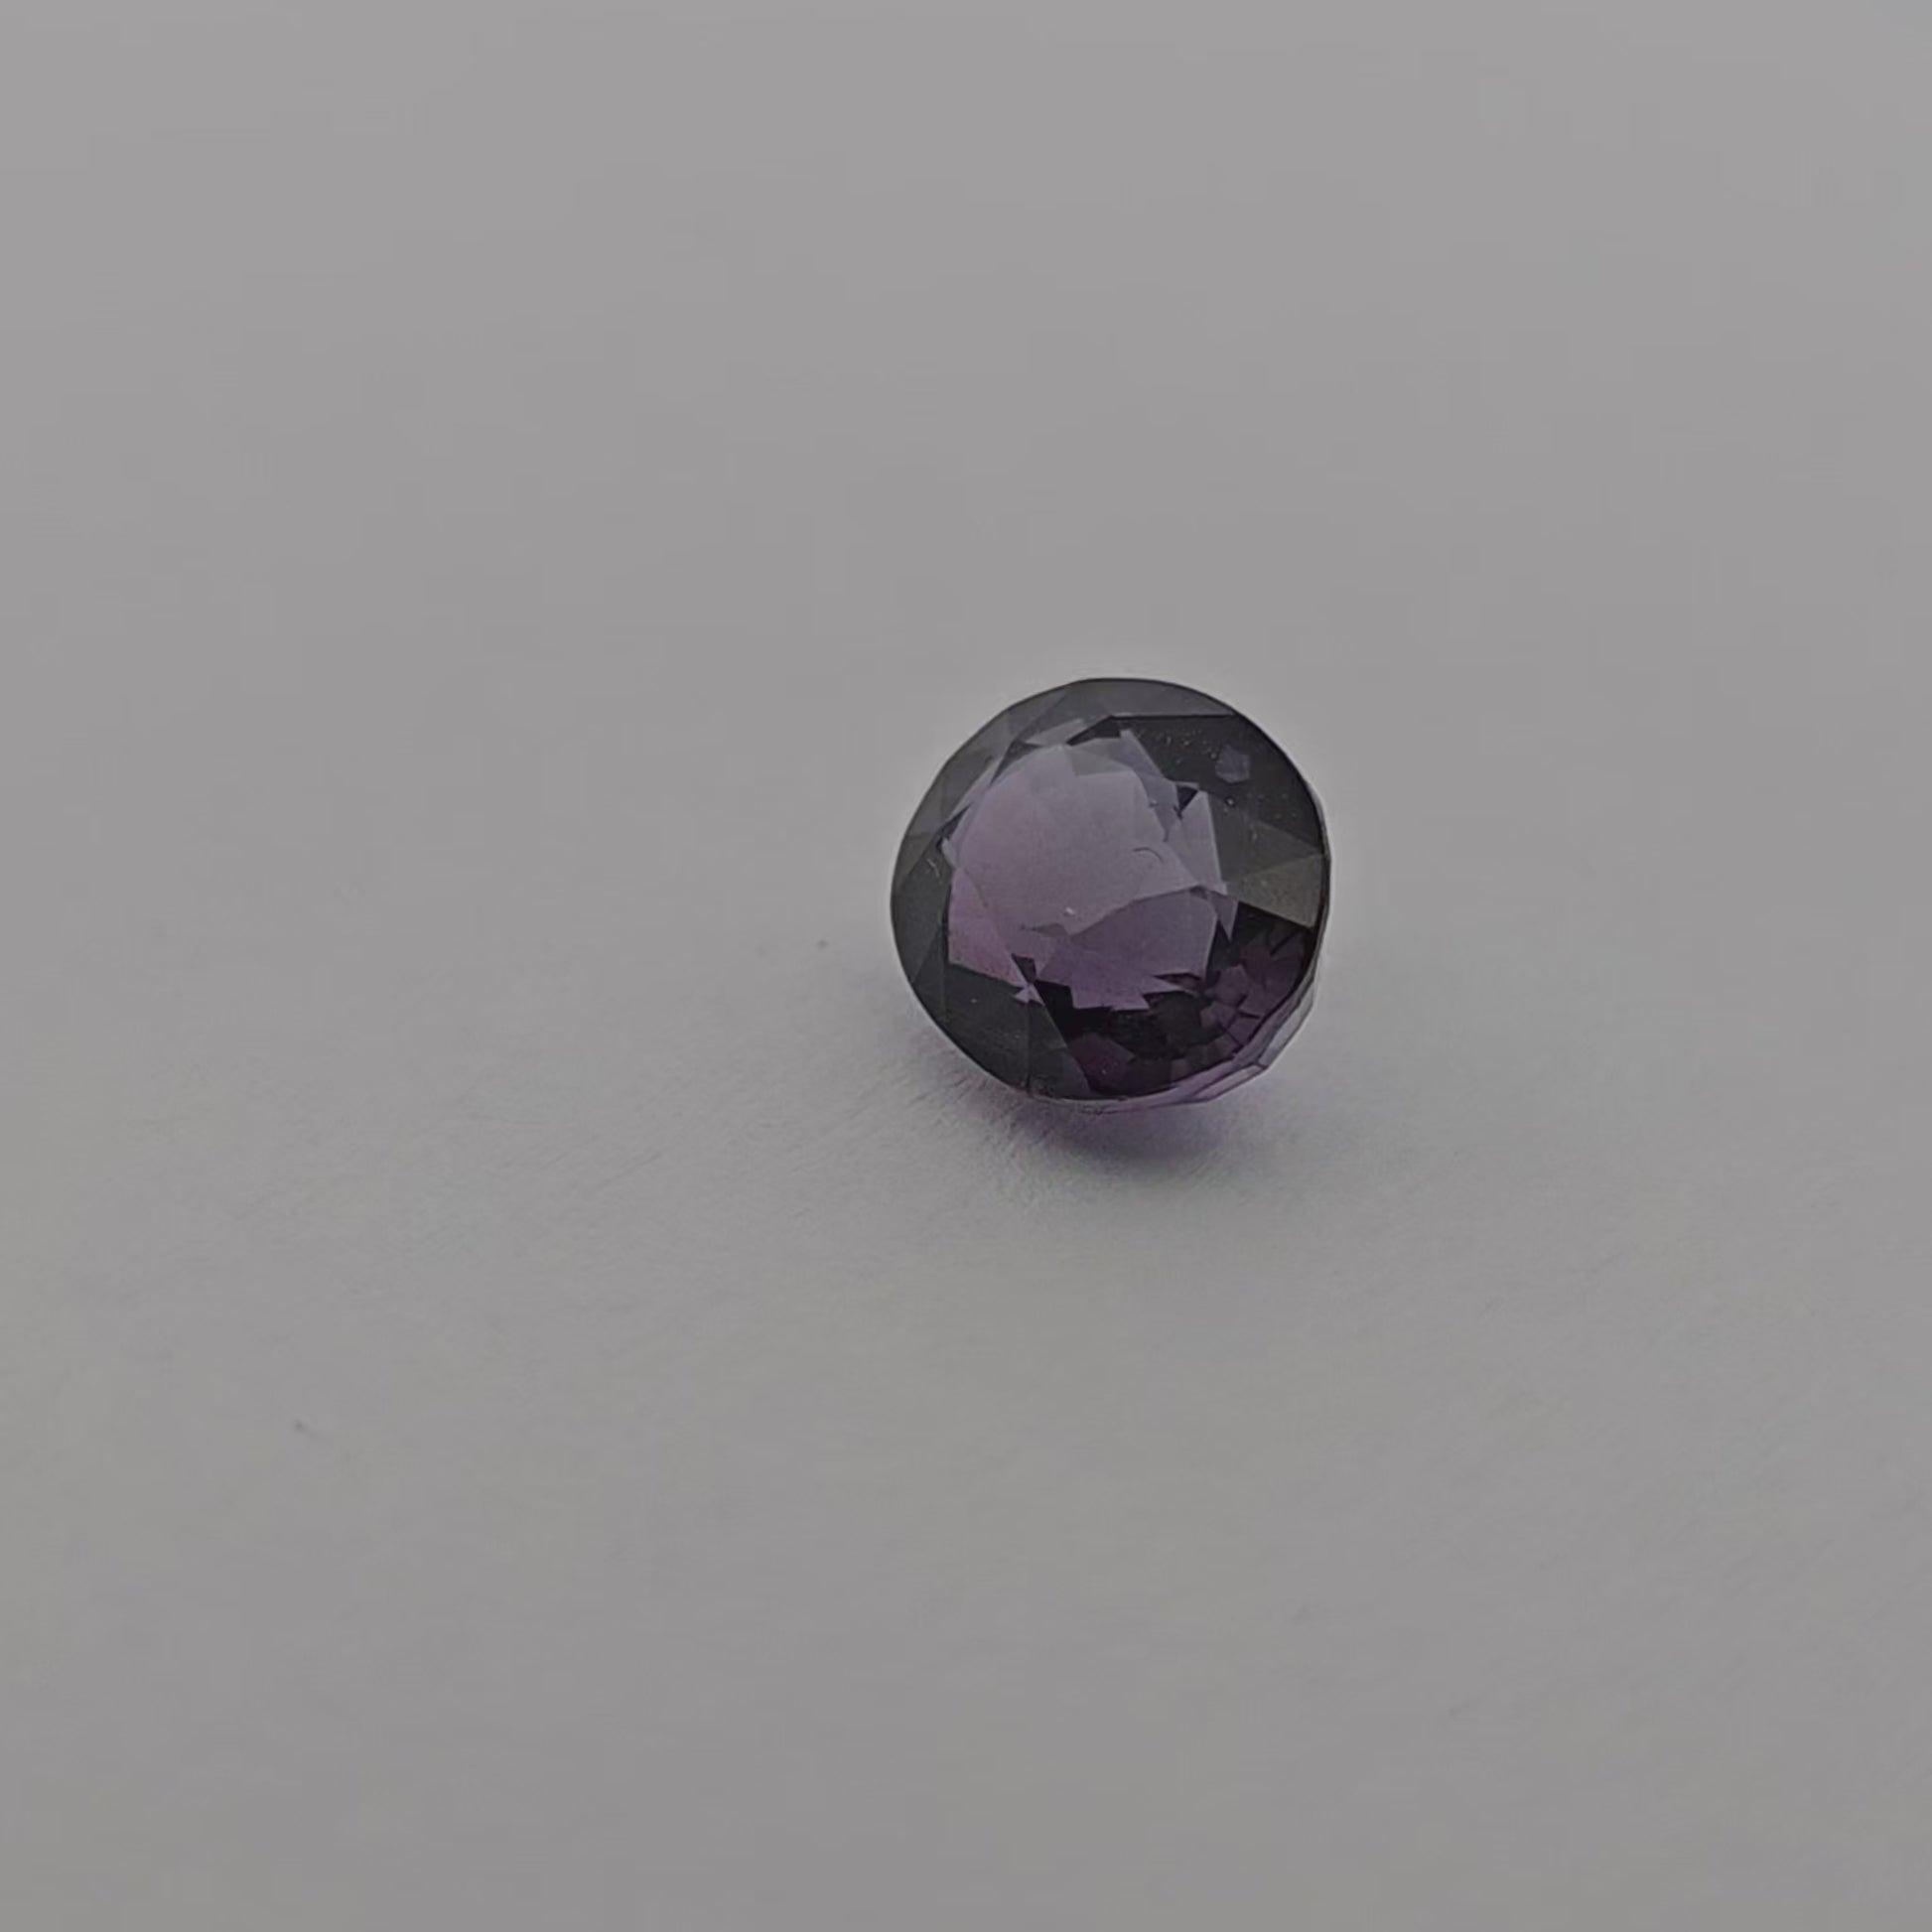 Natural Purple Spinel Stone 2.31 Carats Oval Cut (8.2 x 7 mm)